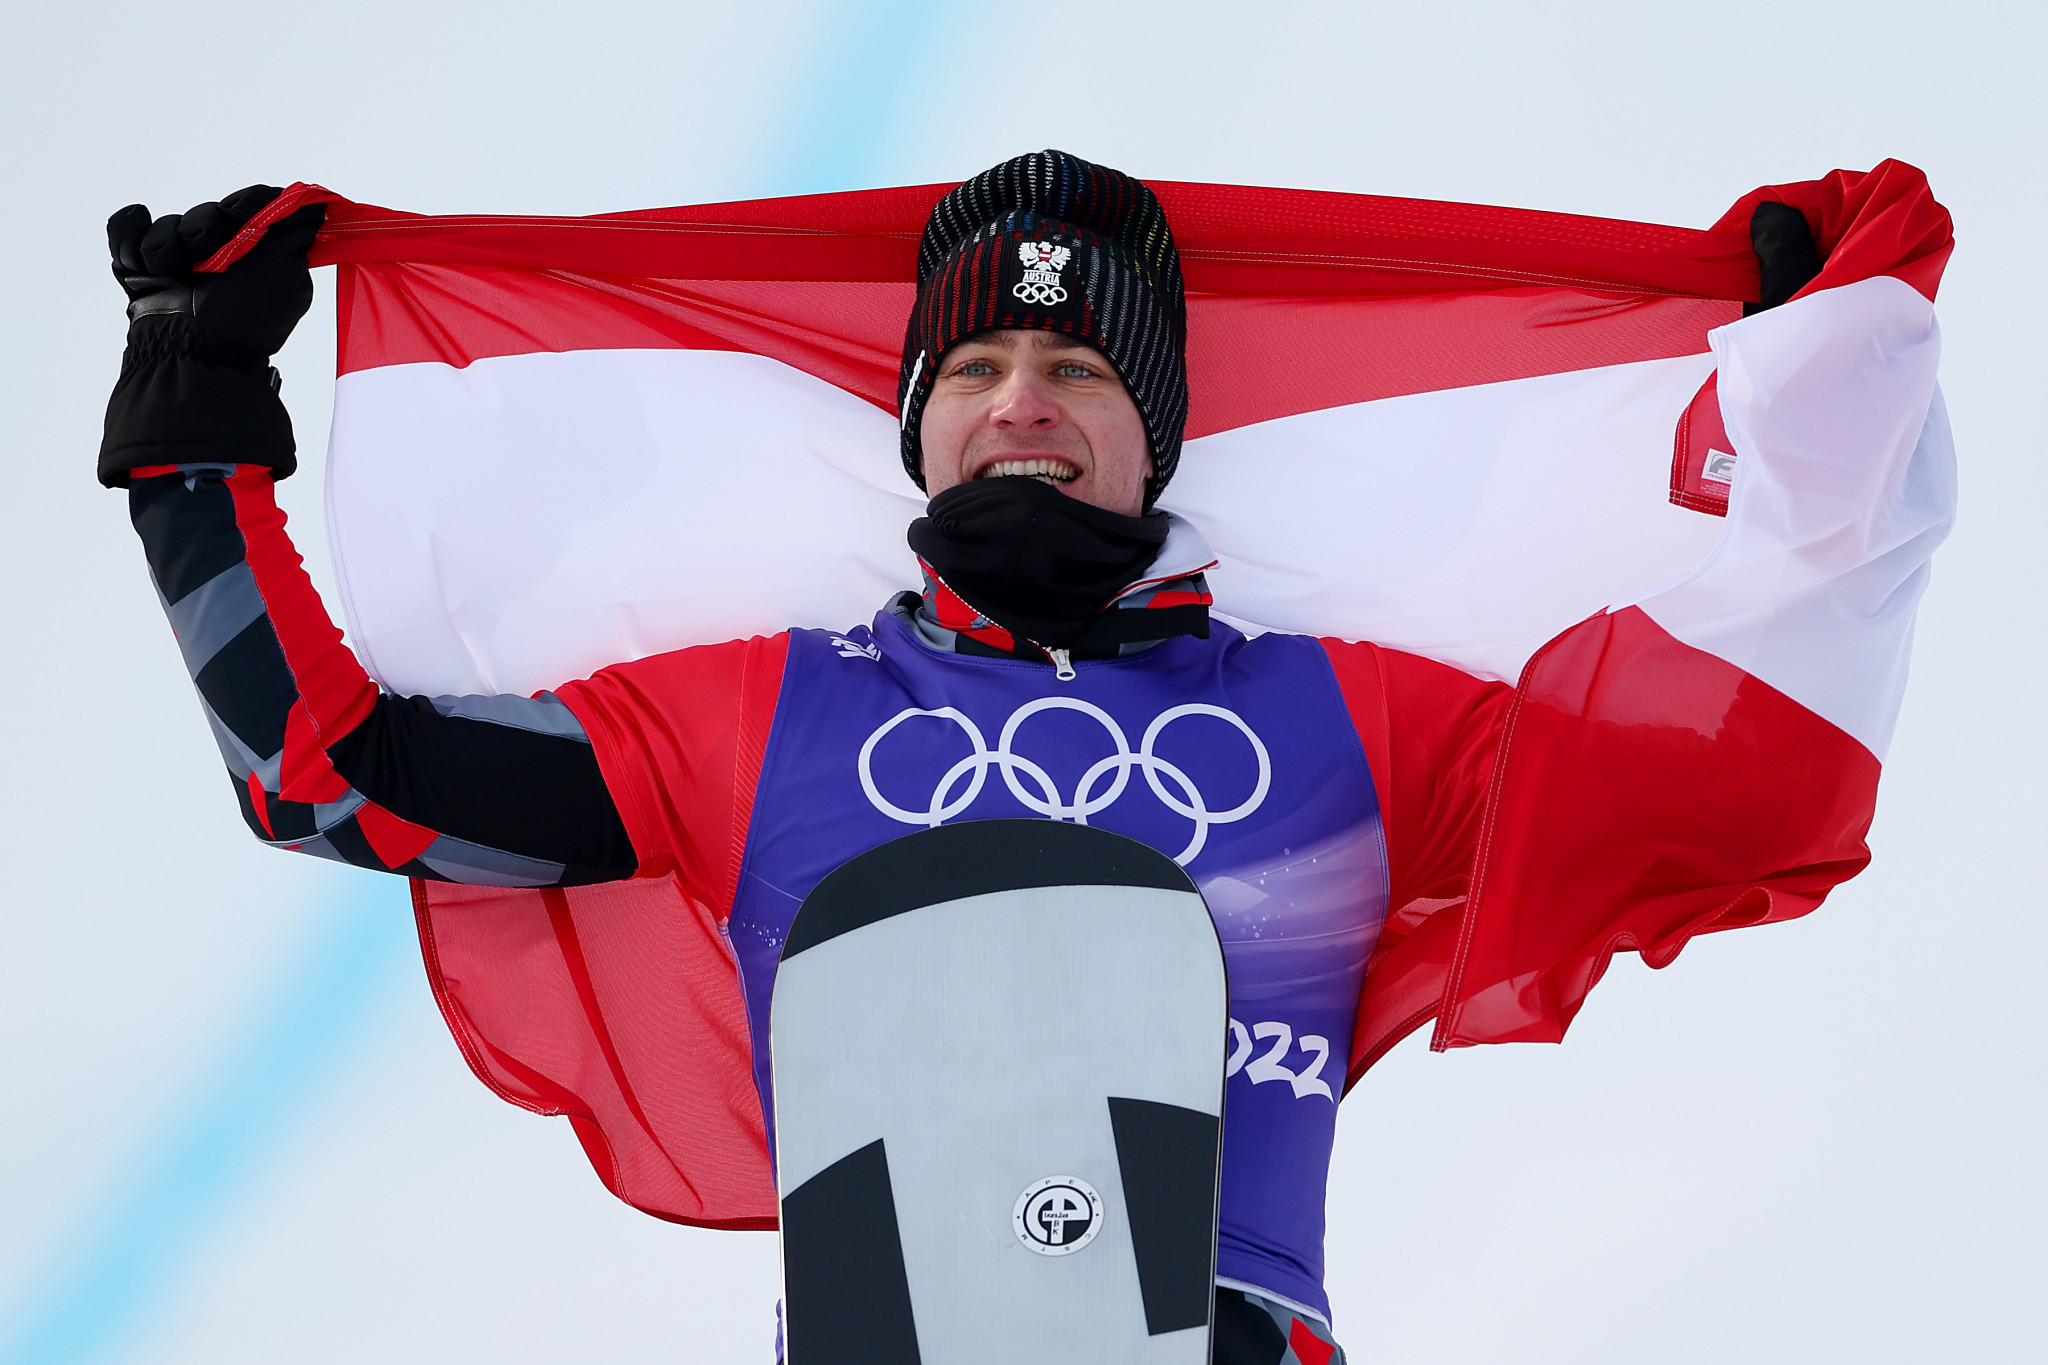 Austria's Alessandro Hämmerle is the Olympic champion in men's snowboard cross after his victory at Beijing 2022 ©Getty Images